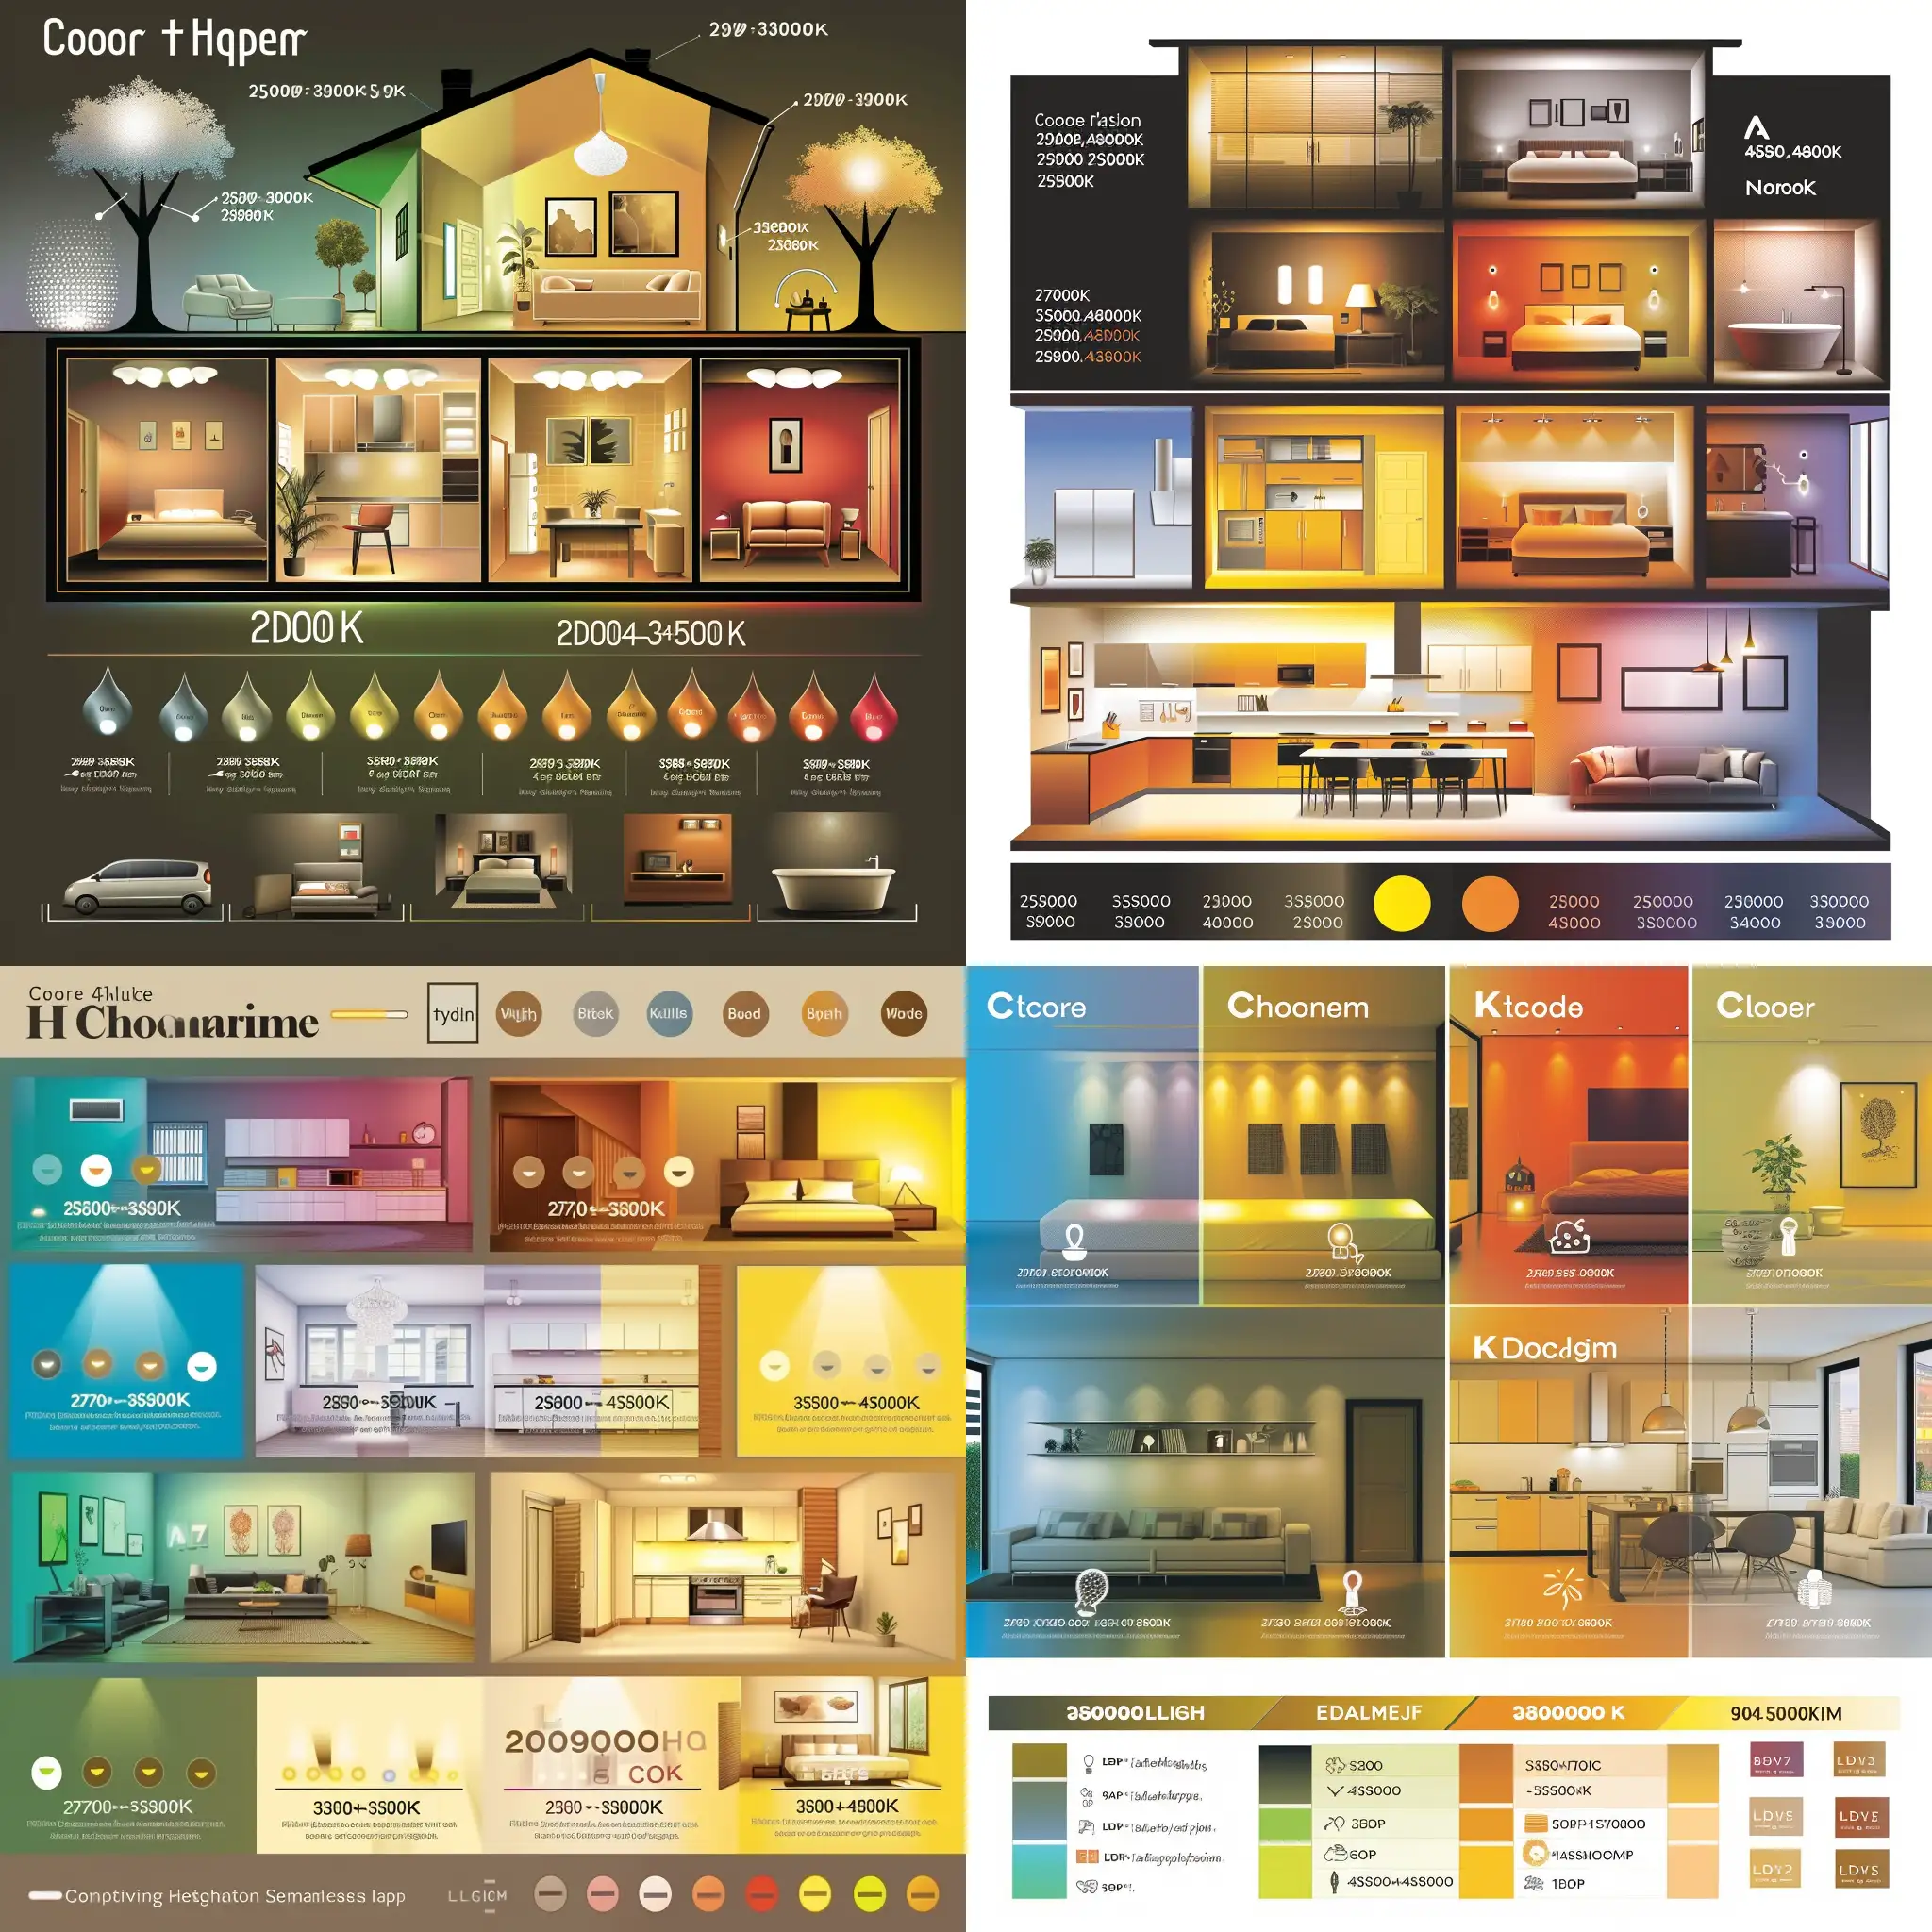 Create a realistic infographic that visualizes the concept of color temperature in home lighting. The graphic should illustrate a home interior divided into different rooms, each lit with the appropriate color temperature of light. Include a color temperature scale ranging from warm to cool (2700K to 5000K and above), with examples of warm, neutral, and cool lighting in the kitchen (3500-4500K), living room (2700-3000K), bedroom (2700-3300K), bathroom (3500-4000K), and hallway (3500-4000K). The style should be clean and modern, with a focus on the ambiance created by each lighting type. Use icons or illustrations to represent different LED light sources like bulbs, LED strips, and fixtures. Highlight the benefits of matching the color temperature to the room's function and the positive impact on mood and comfort. Ensure the infographic is informative and easy to understand for readers interested in home decor and lighting design.